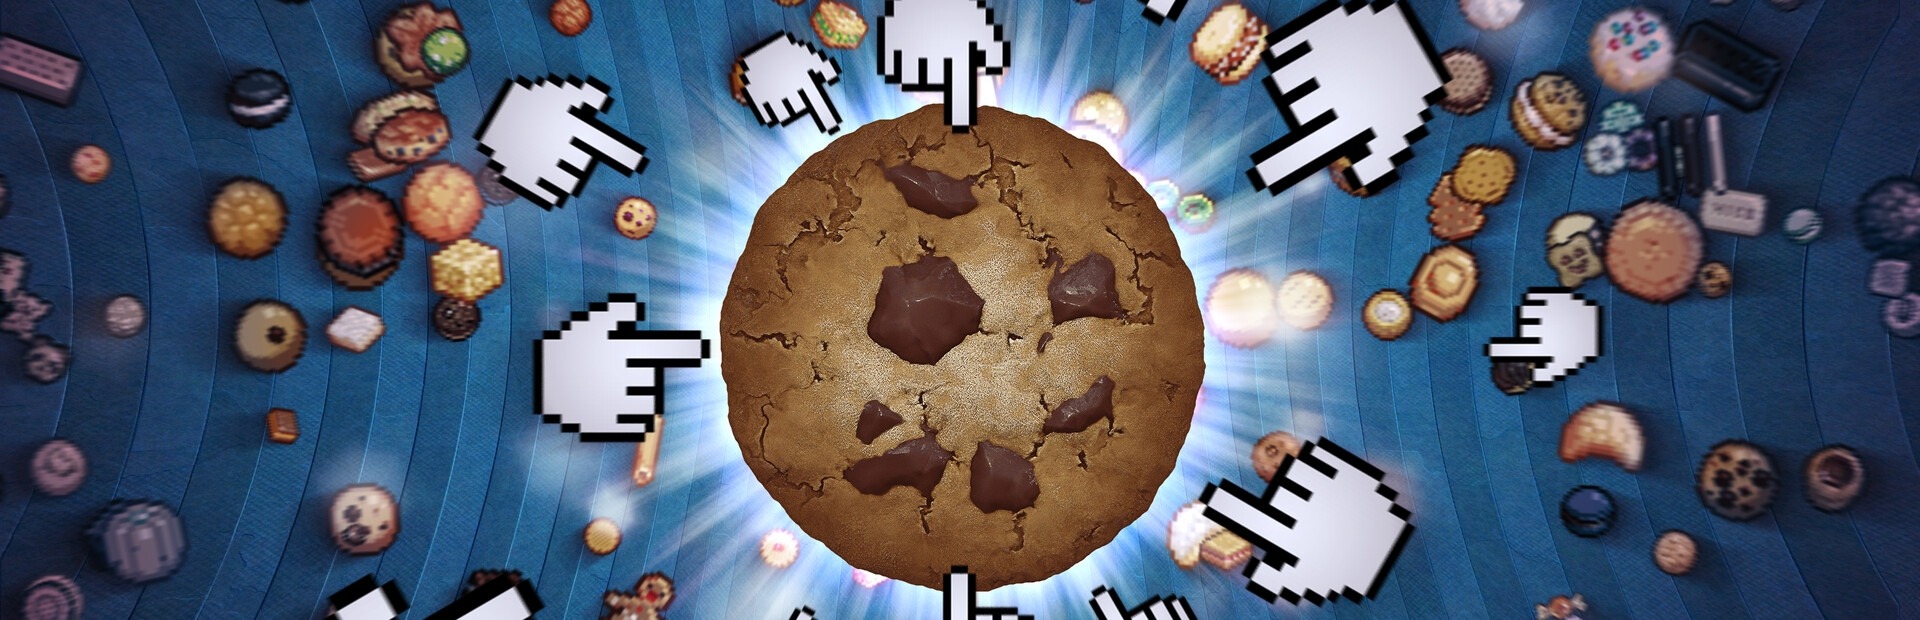 Cookie clicker steam фото 68